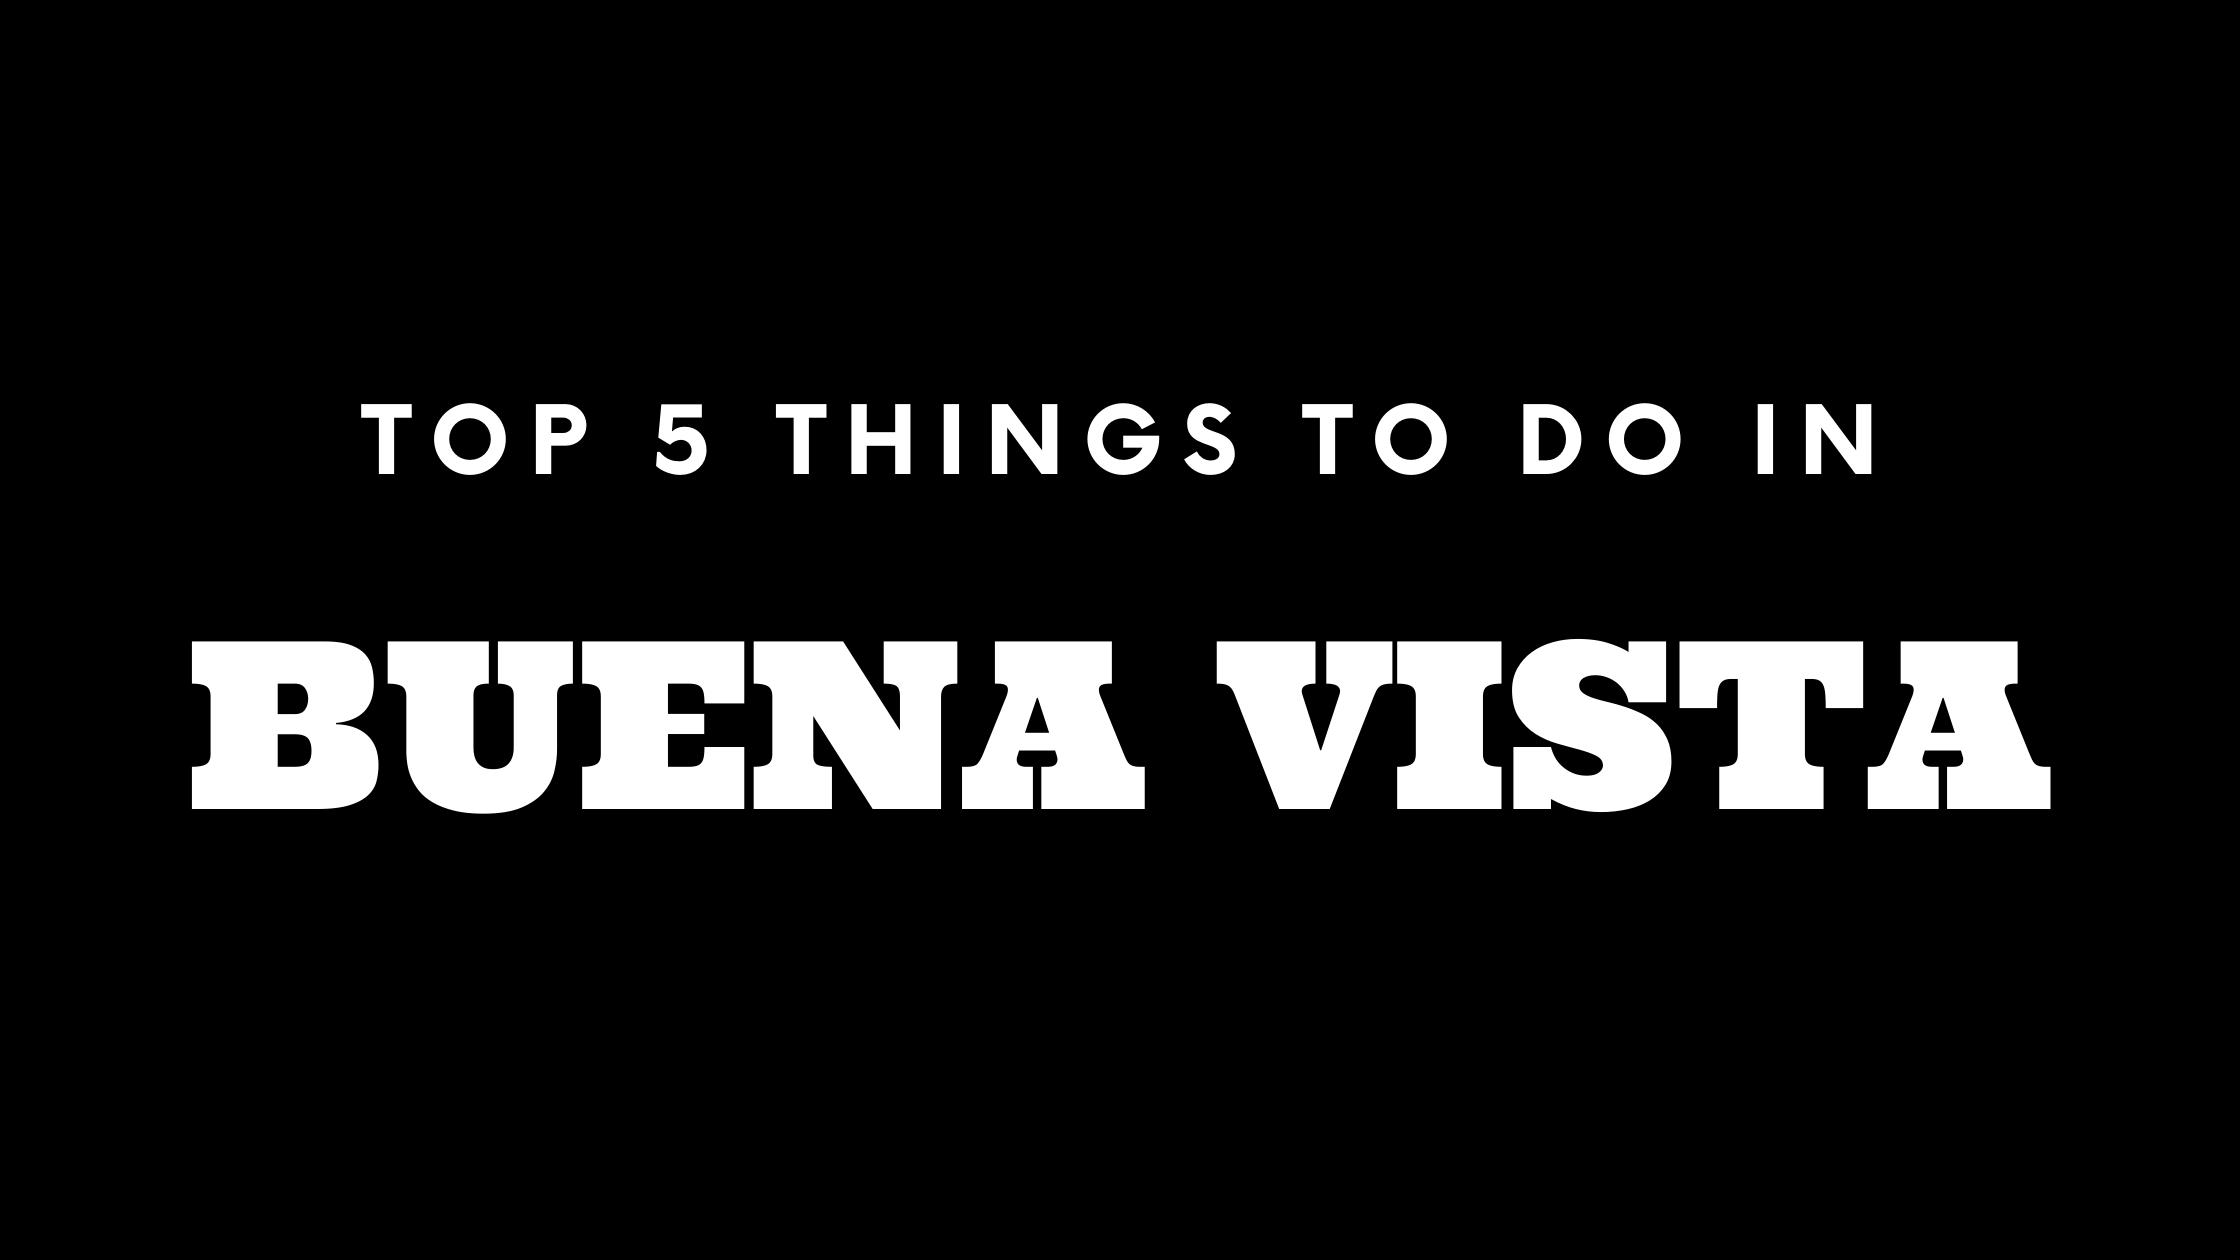 Top 5 Things To Do in Buena Vista